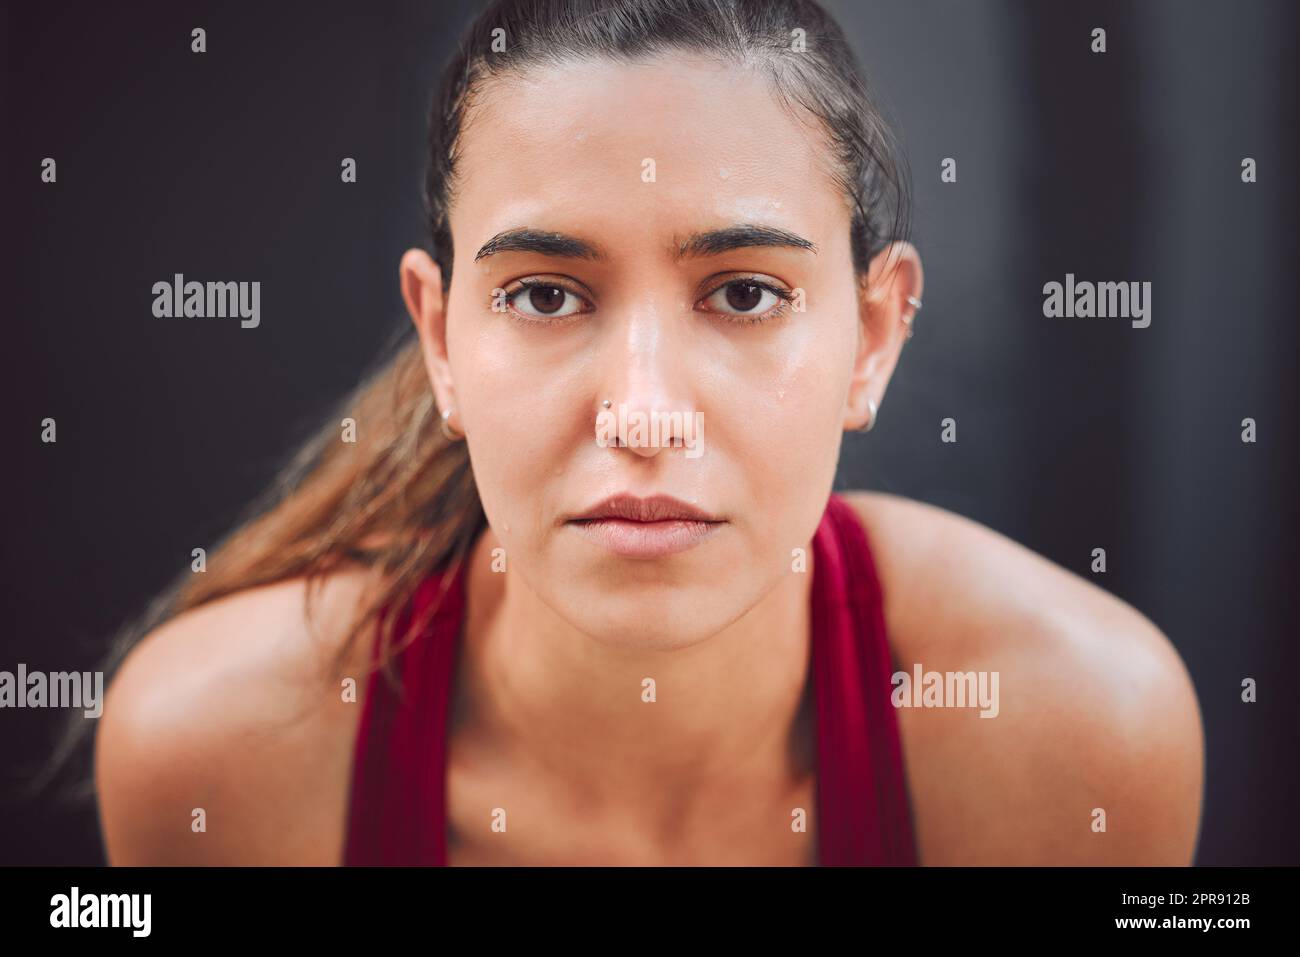 Focused on the run. Cropped portrait of an attractive young female athlete looking tired while running outdoors. Stock Photo